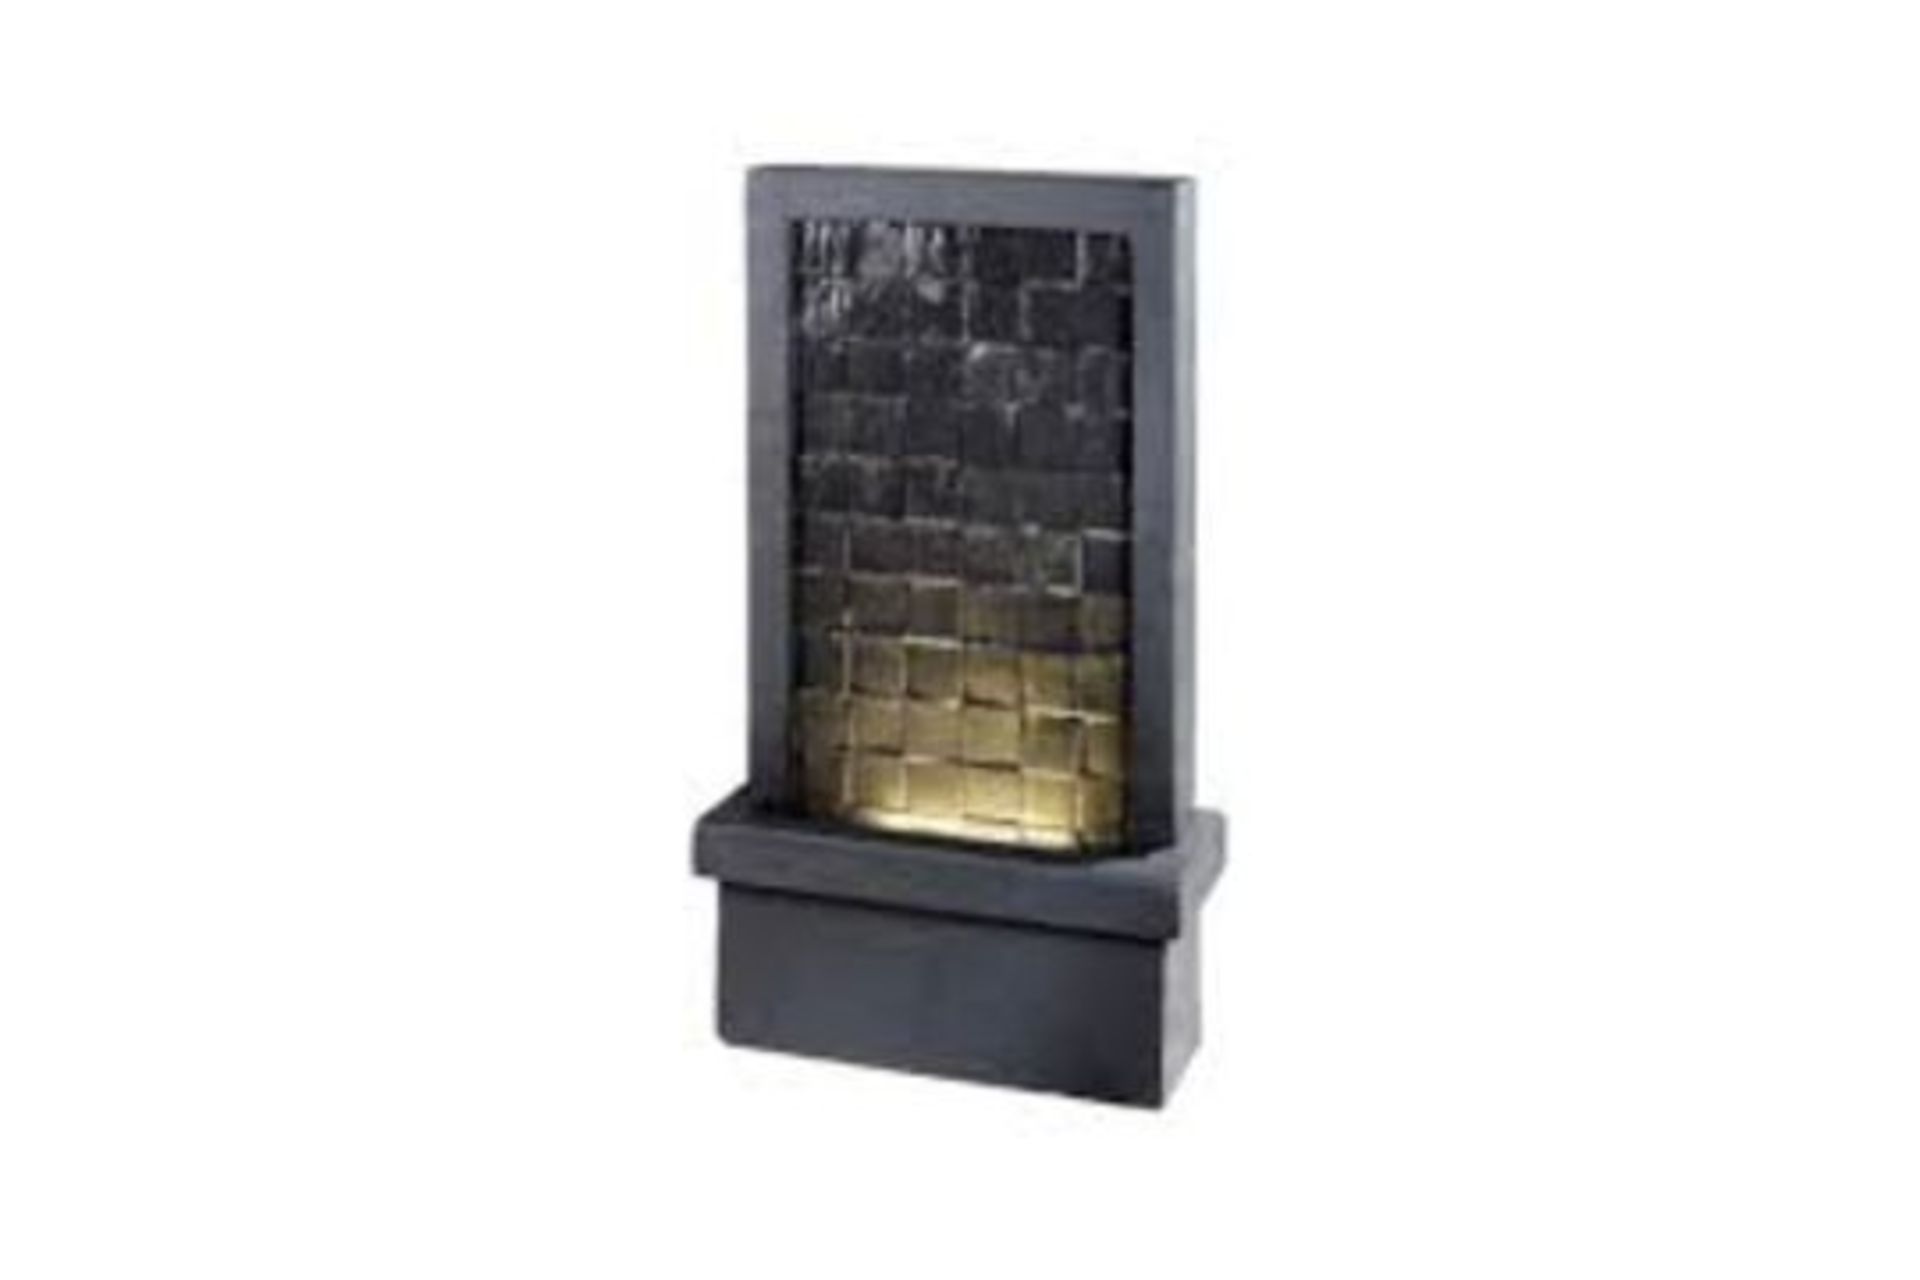 New & Boxed Tiled Waterfall Water Feature - Tall LED Wall Lit Cascading Water Fountain. RRP £349.99. - Image 2 of 6